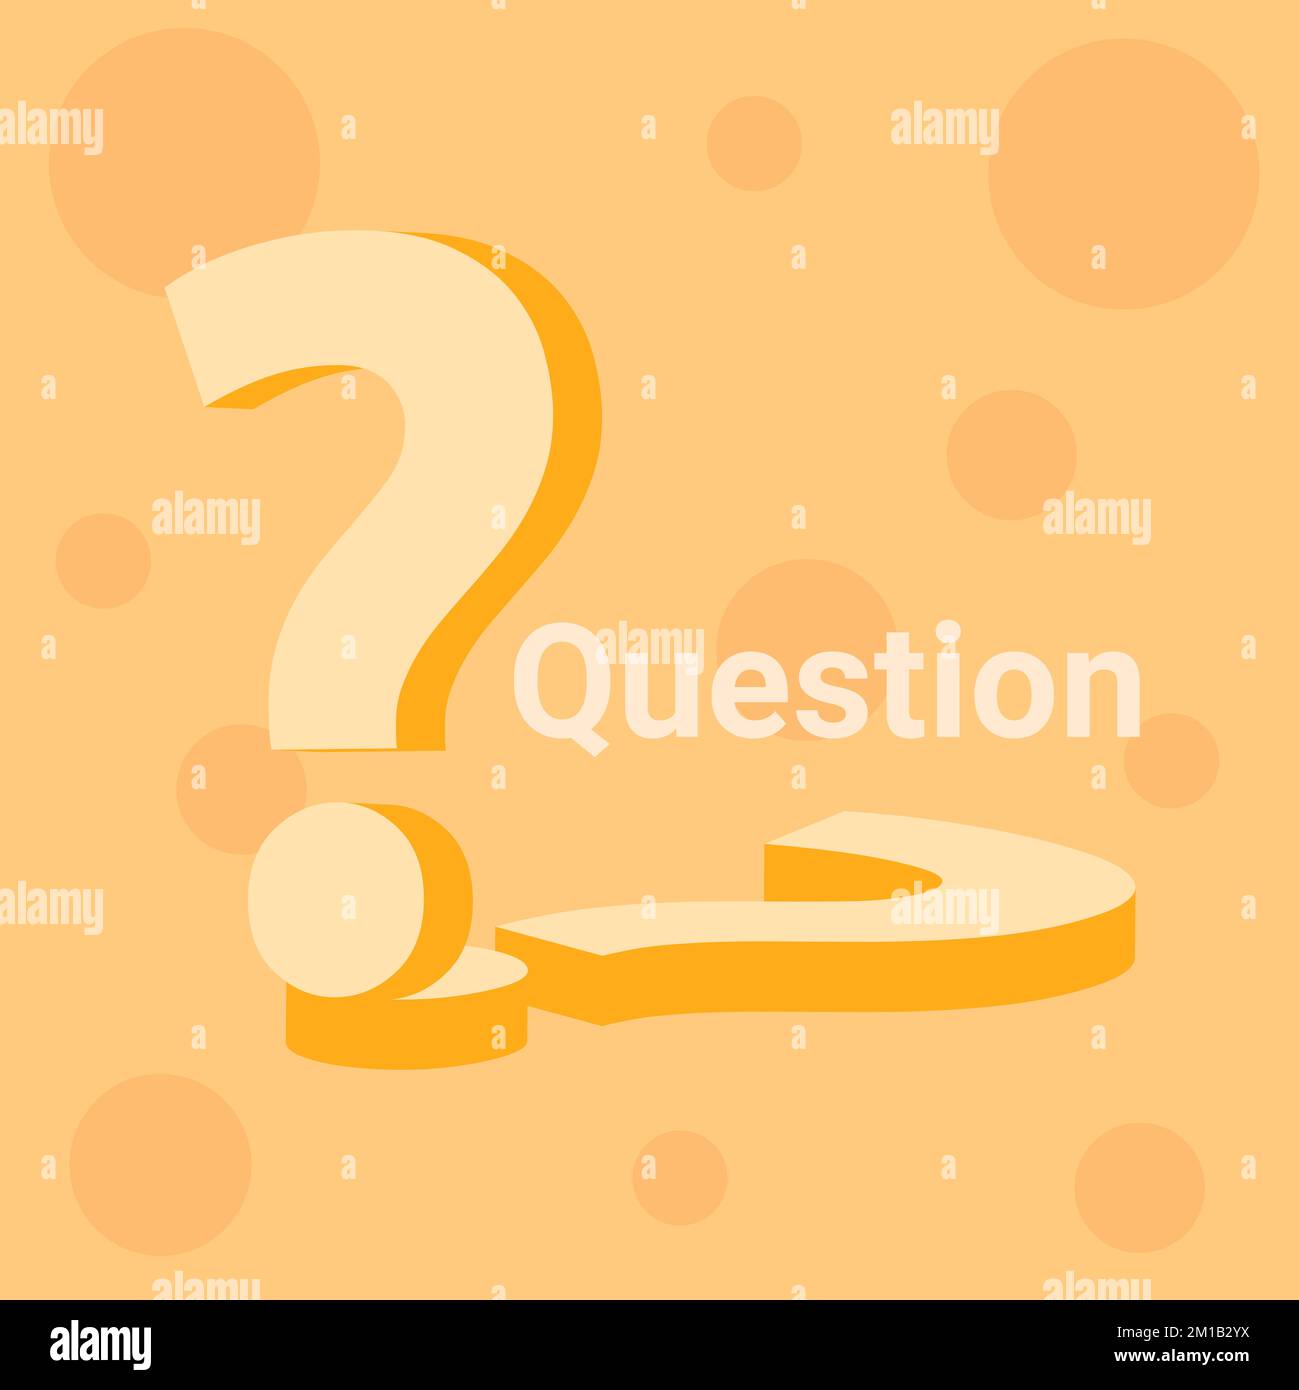 Vector illustration with 3D question marks and orange circles background. Online helpline. Frequently asked questions concept. Question Stock Photo